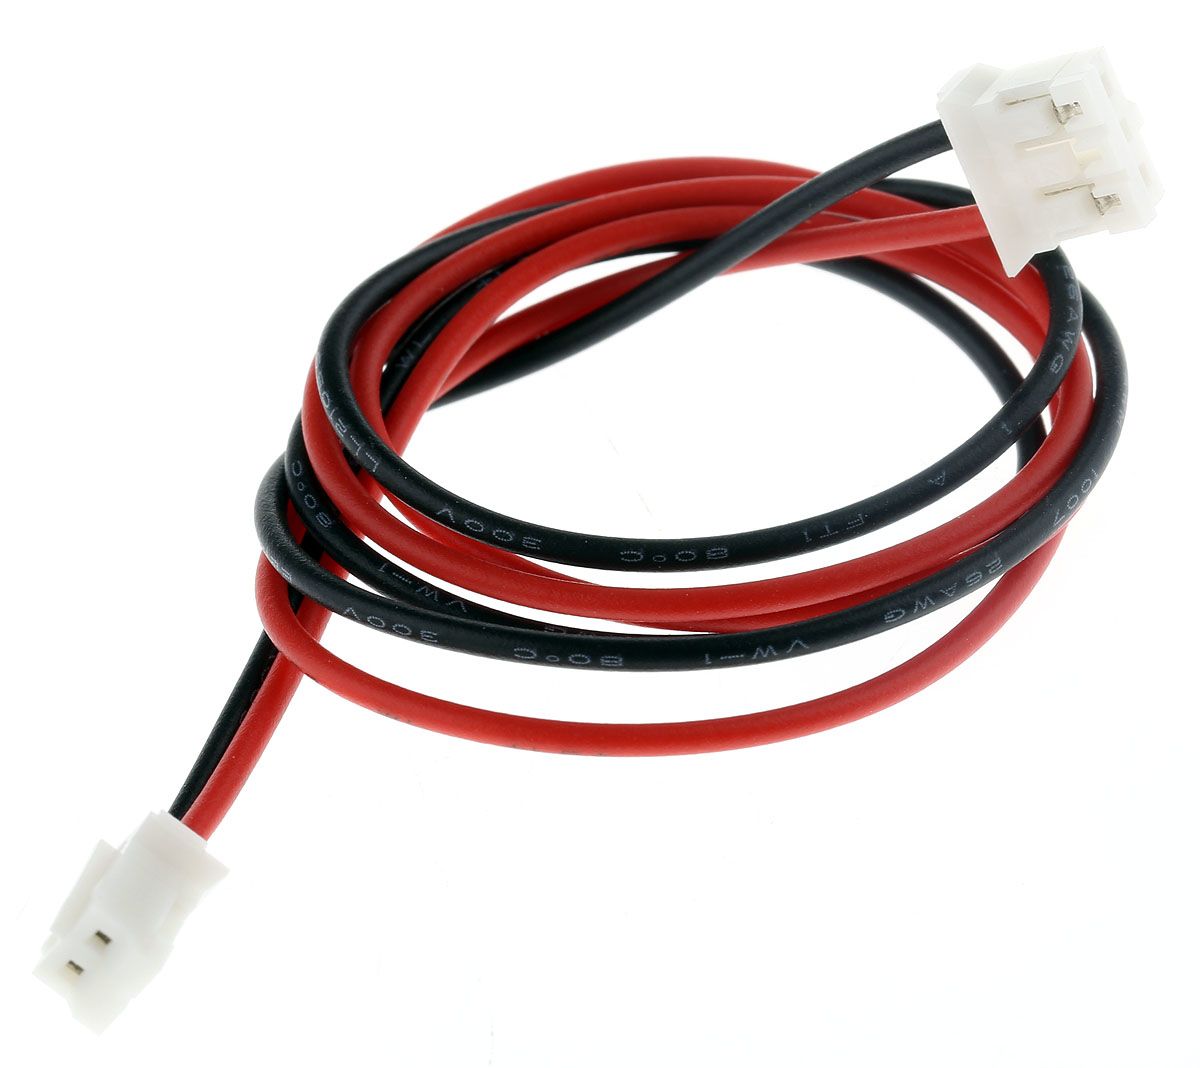 ILS CAB-ILS-GD06-Link LED Cable for for Dragon6 & Oslon6 Strip, 300mm